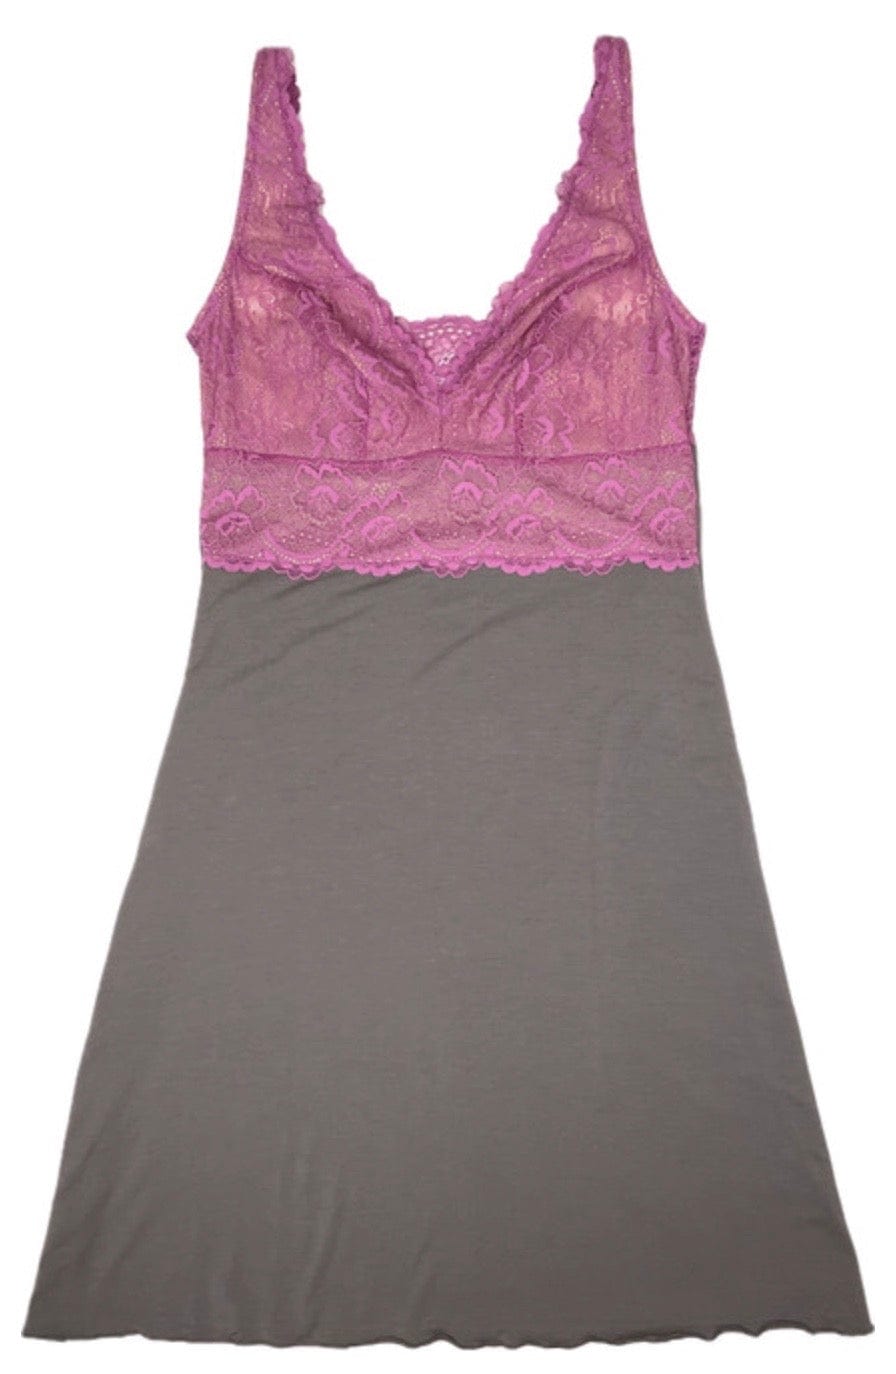 Samantha Chang Chemise Smokey Grey W/ Orchid Lace / S Samantha Chang Home Apparel Built Up Chemise